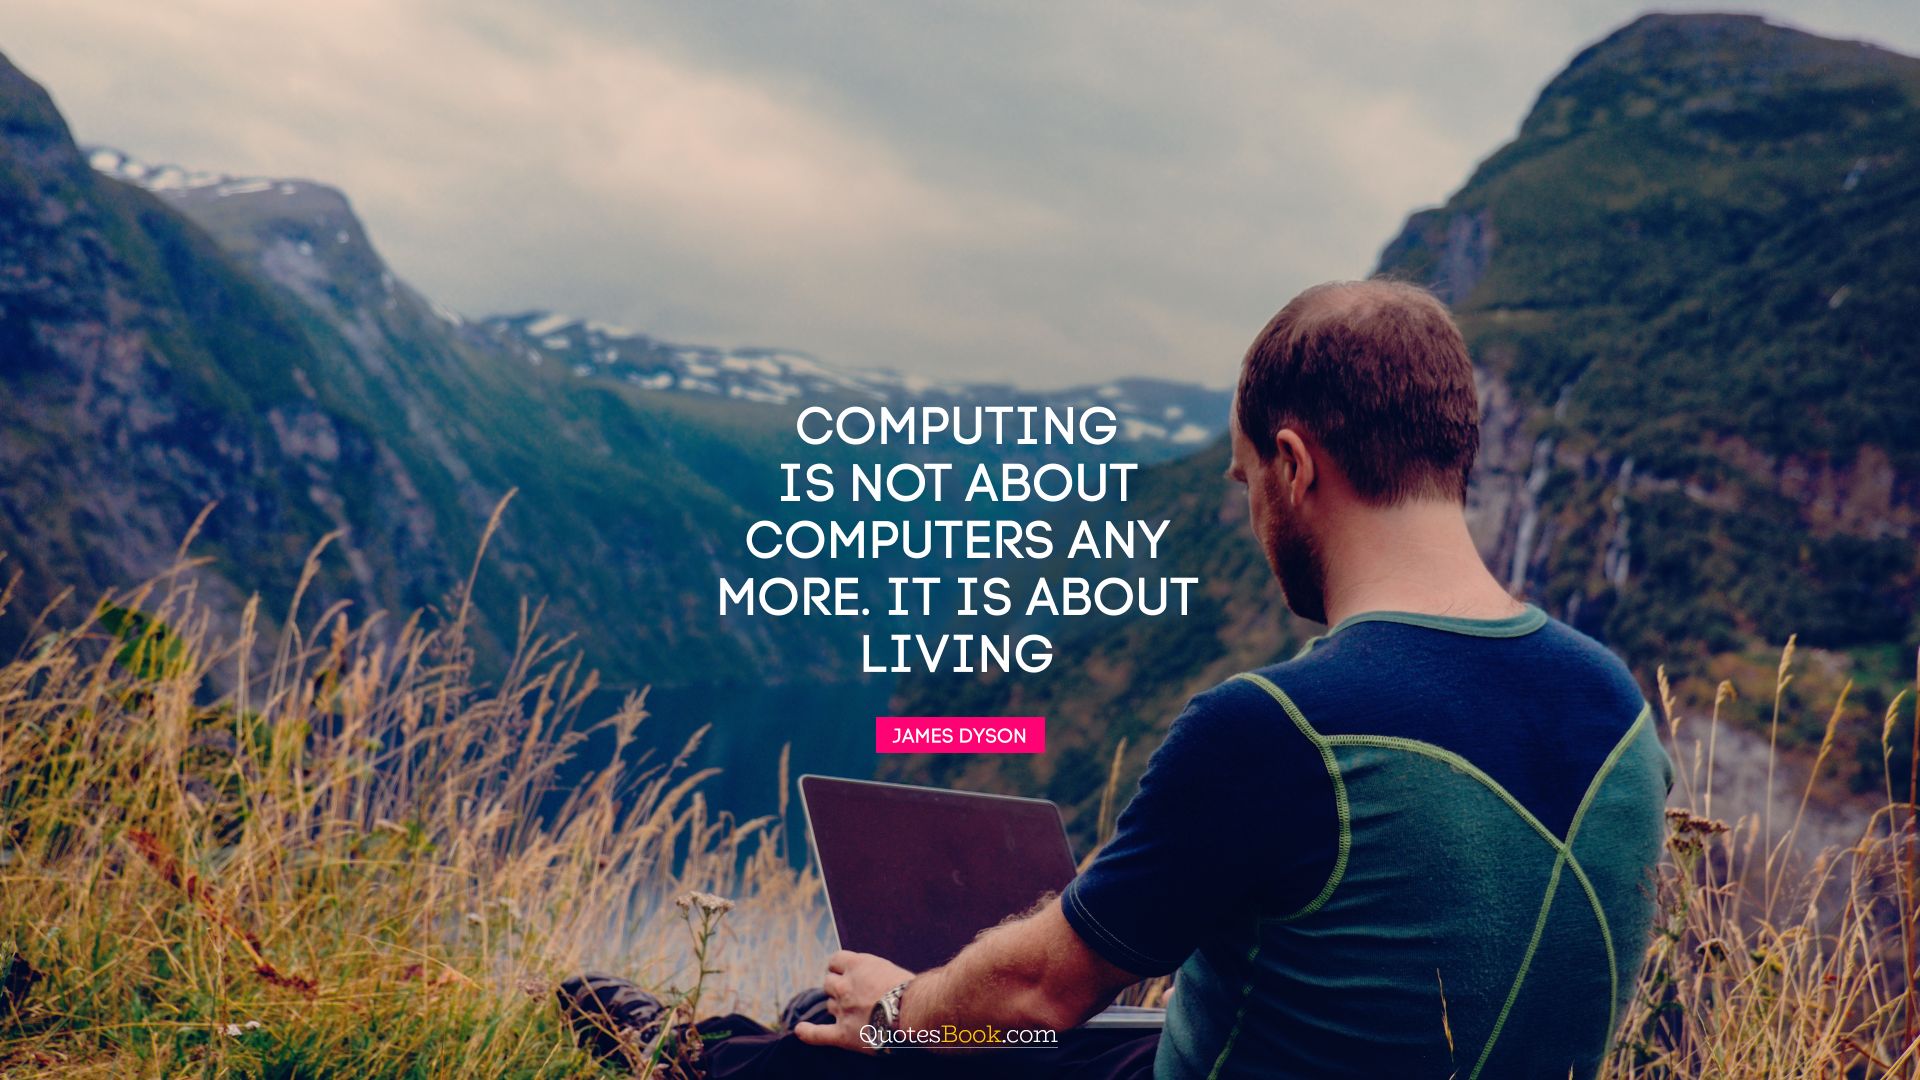 Computing is not about computers any more. It is about living. - Quote by Nicholas Negroponte